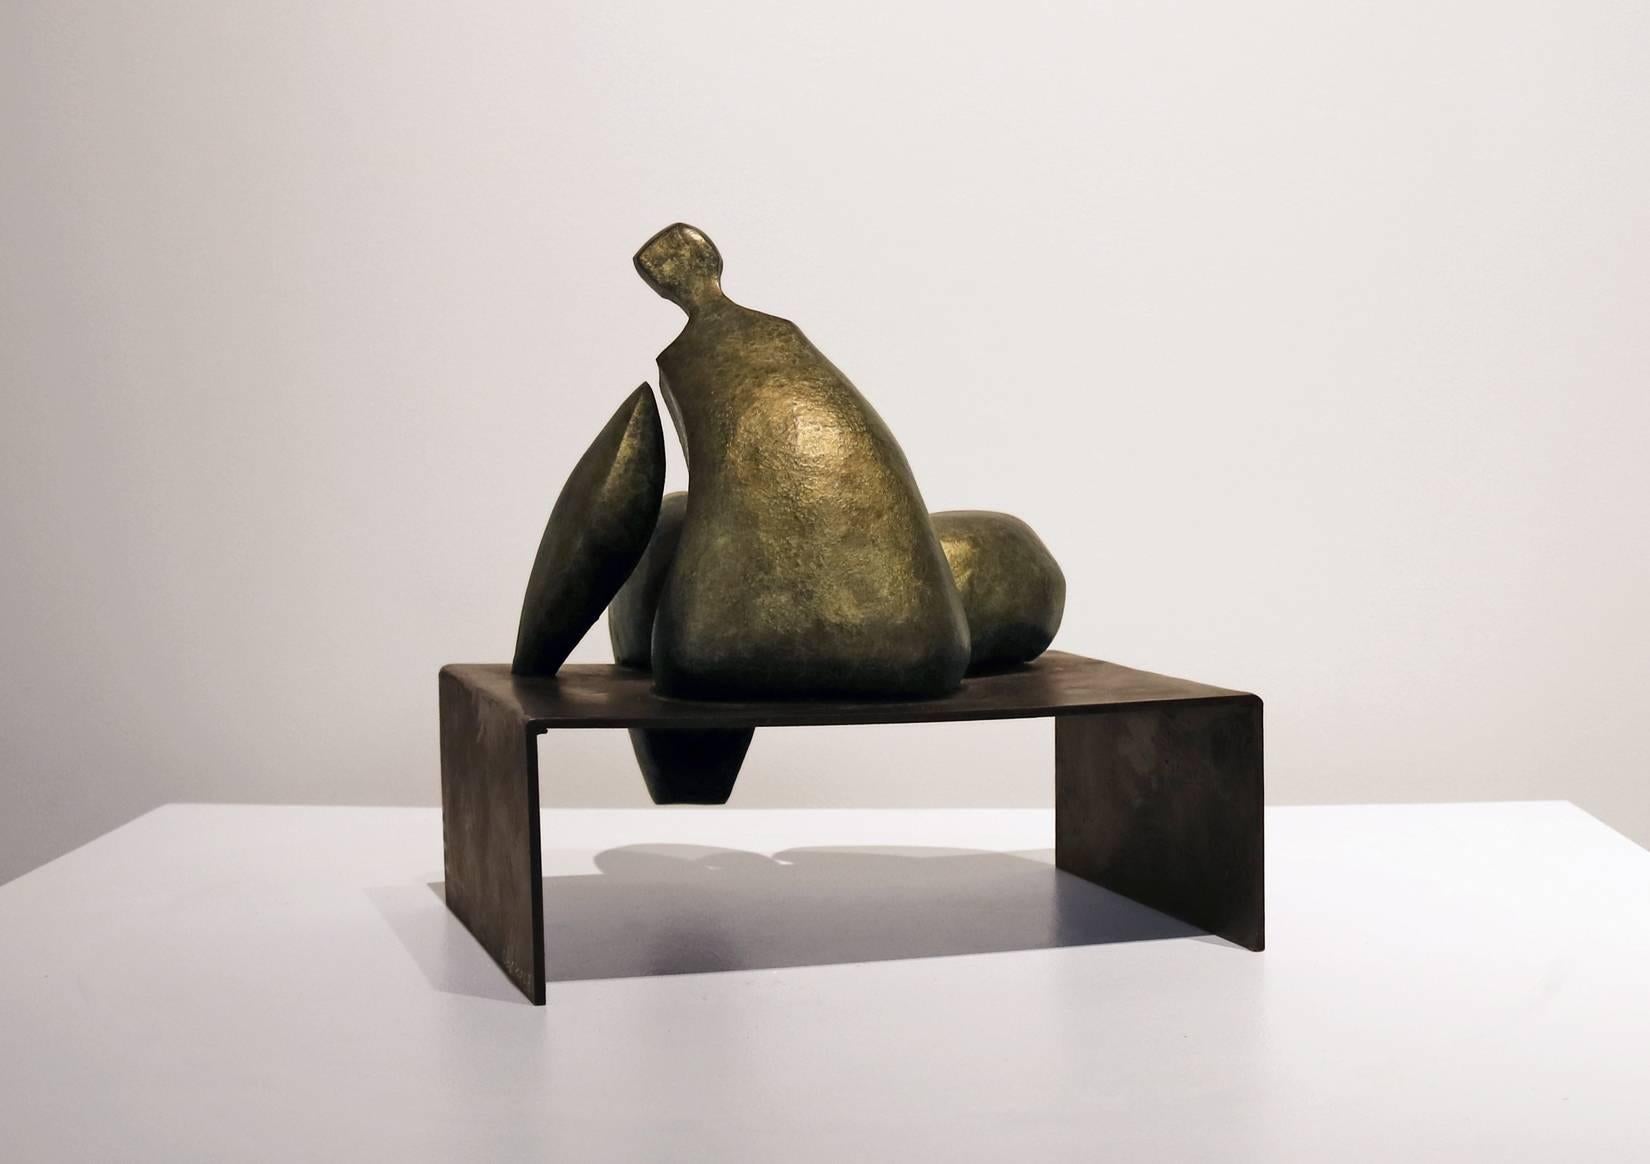 Seated 4 Miniature - Gold Figurative Sculpture by Robert Holmes